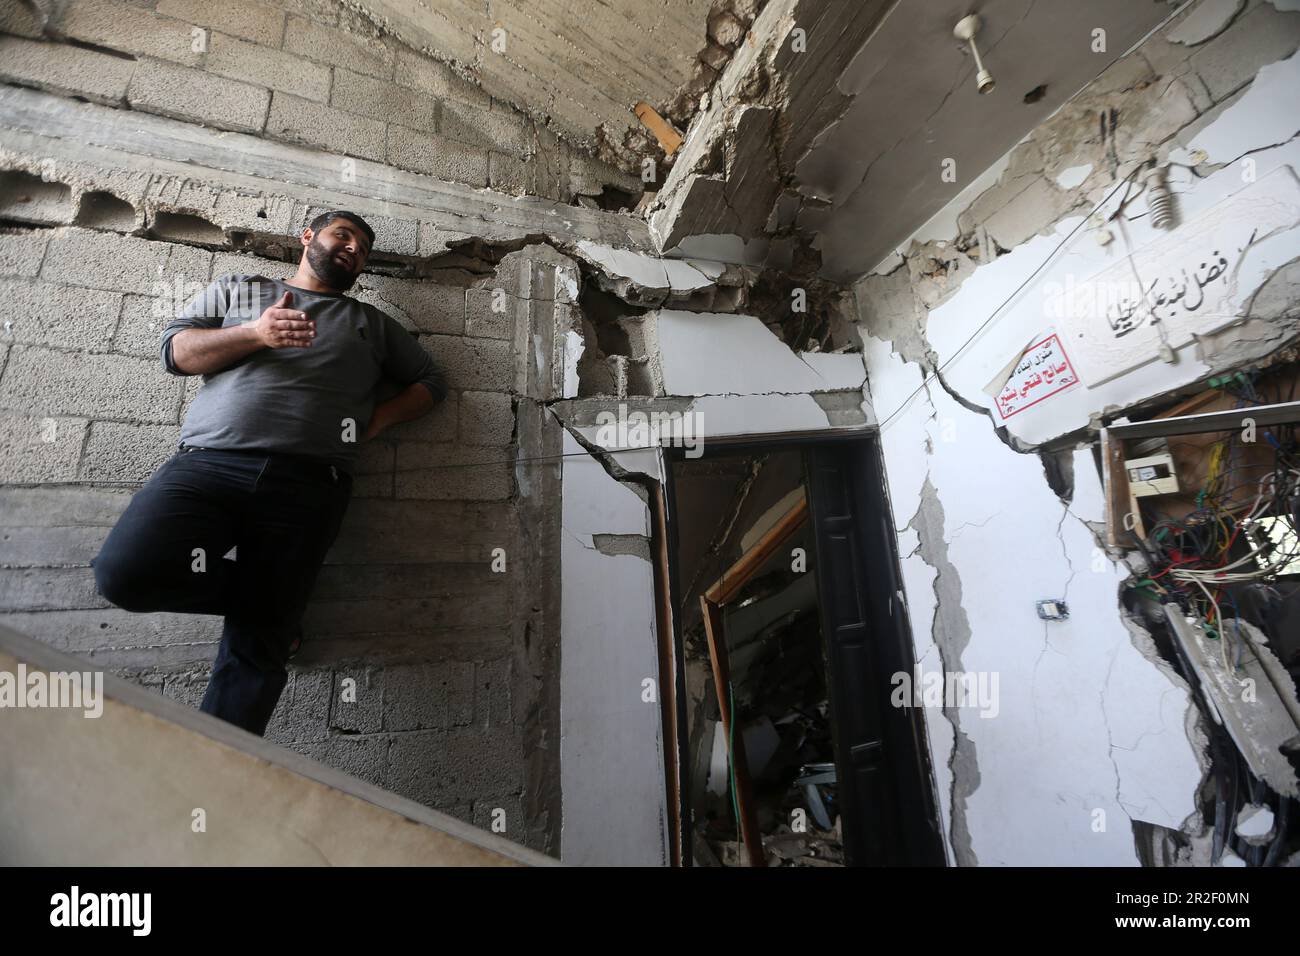 A man inspects a destroyed building belonging to the Al-Bashir Family after the Israeli attacks in Deir Balah, Gaza City. Palestine. Stock Photo